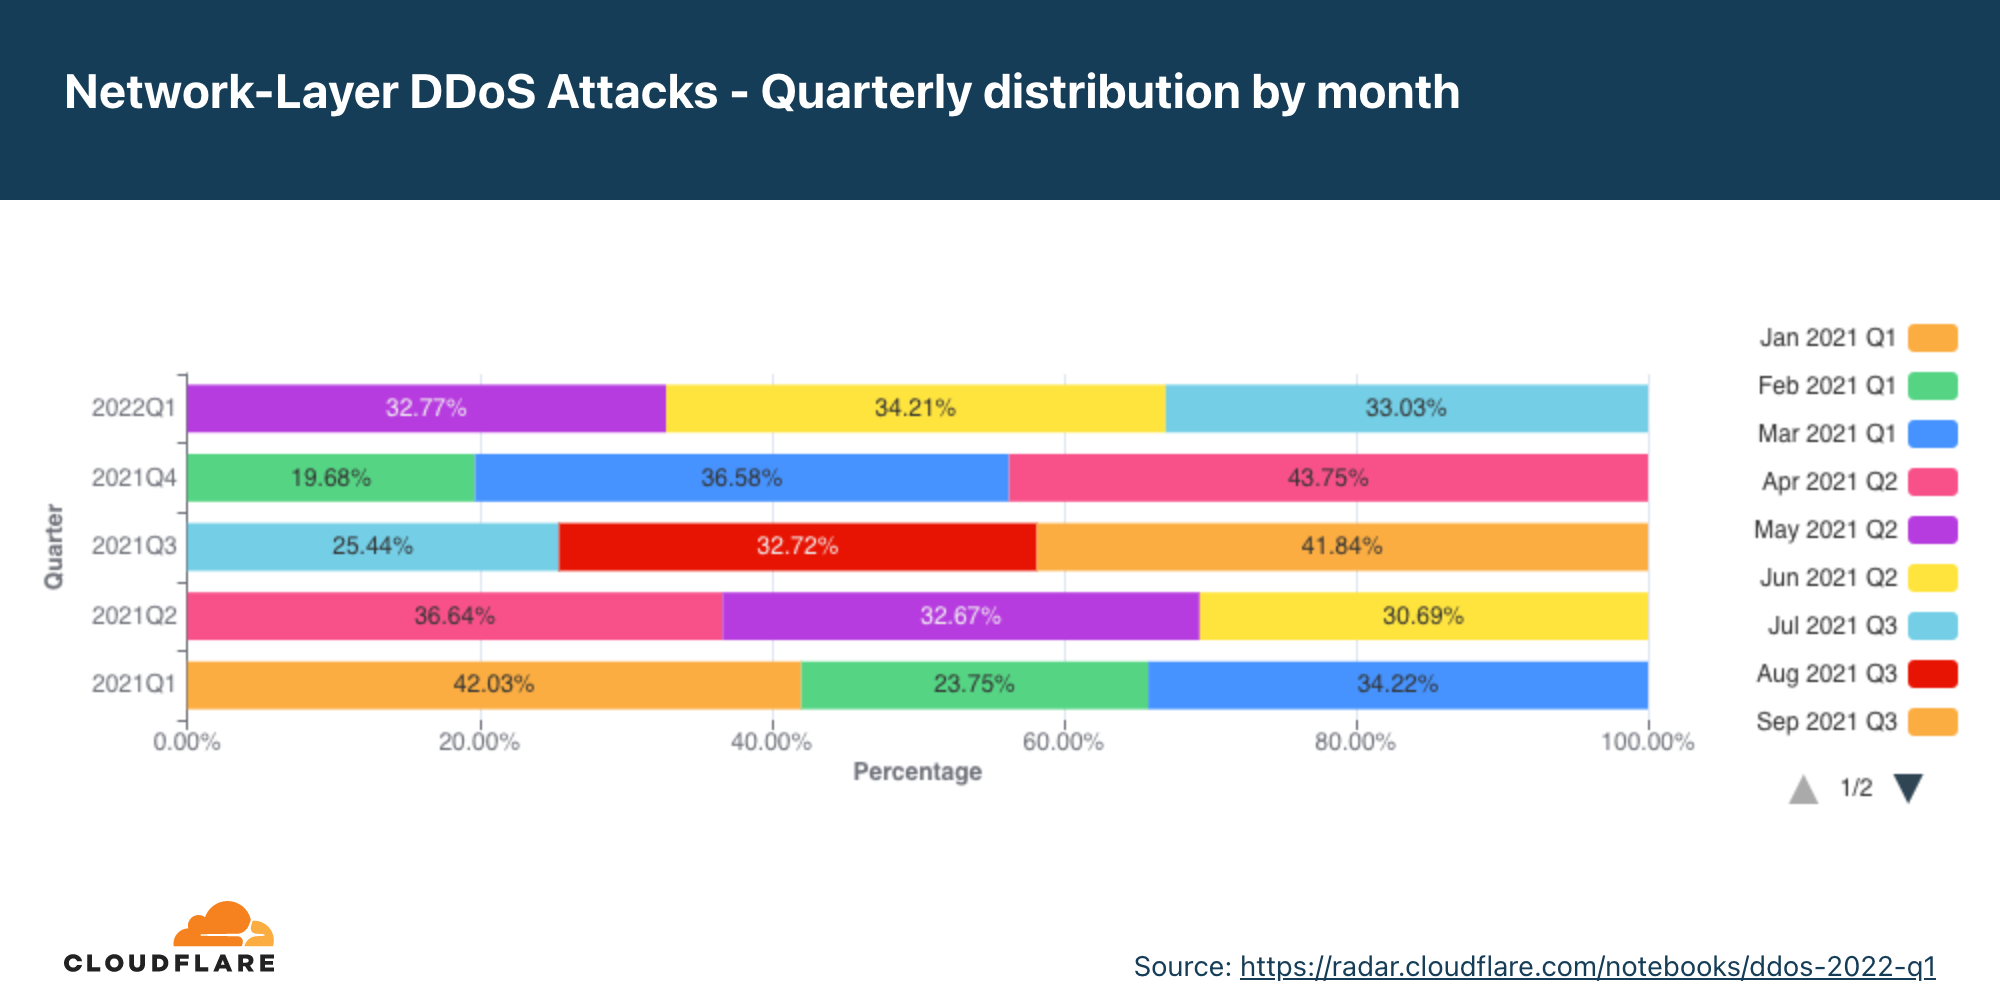 Graph of the quarterly distribution of network-layer DDoS attacks by month in the past 12 months